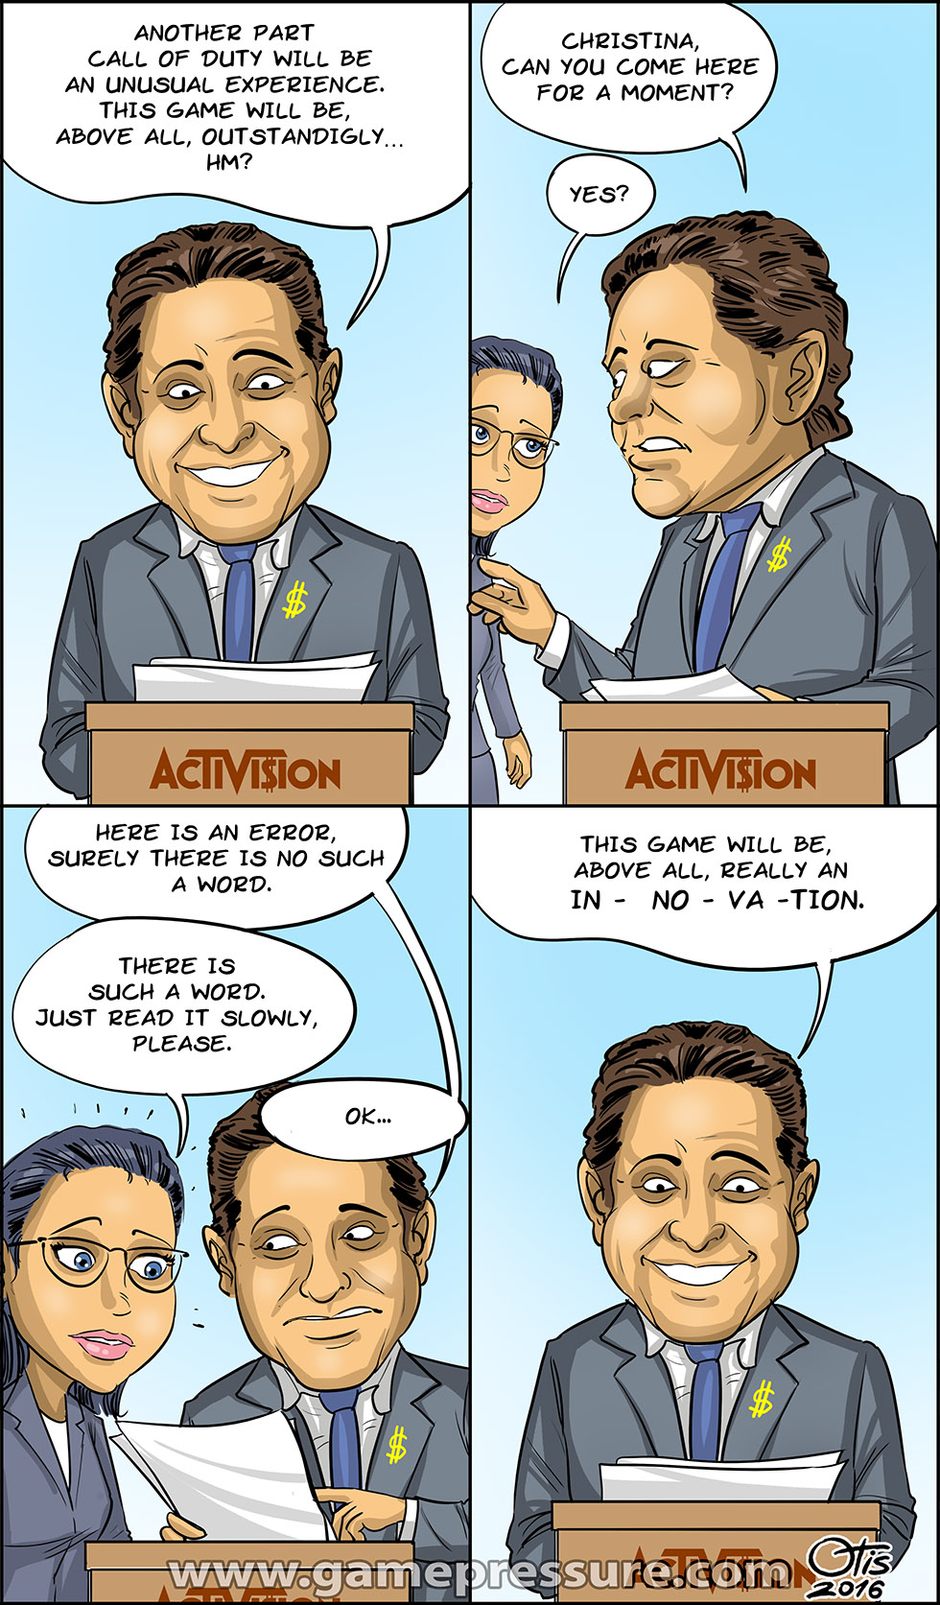 Call of Duty: Innovation, comics Cartoon Games, #170. It's a difficult word for Activision.